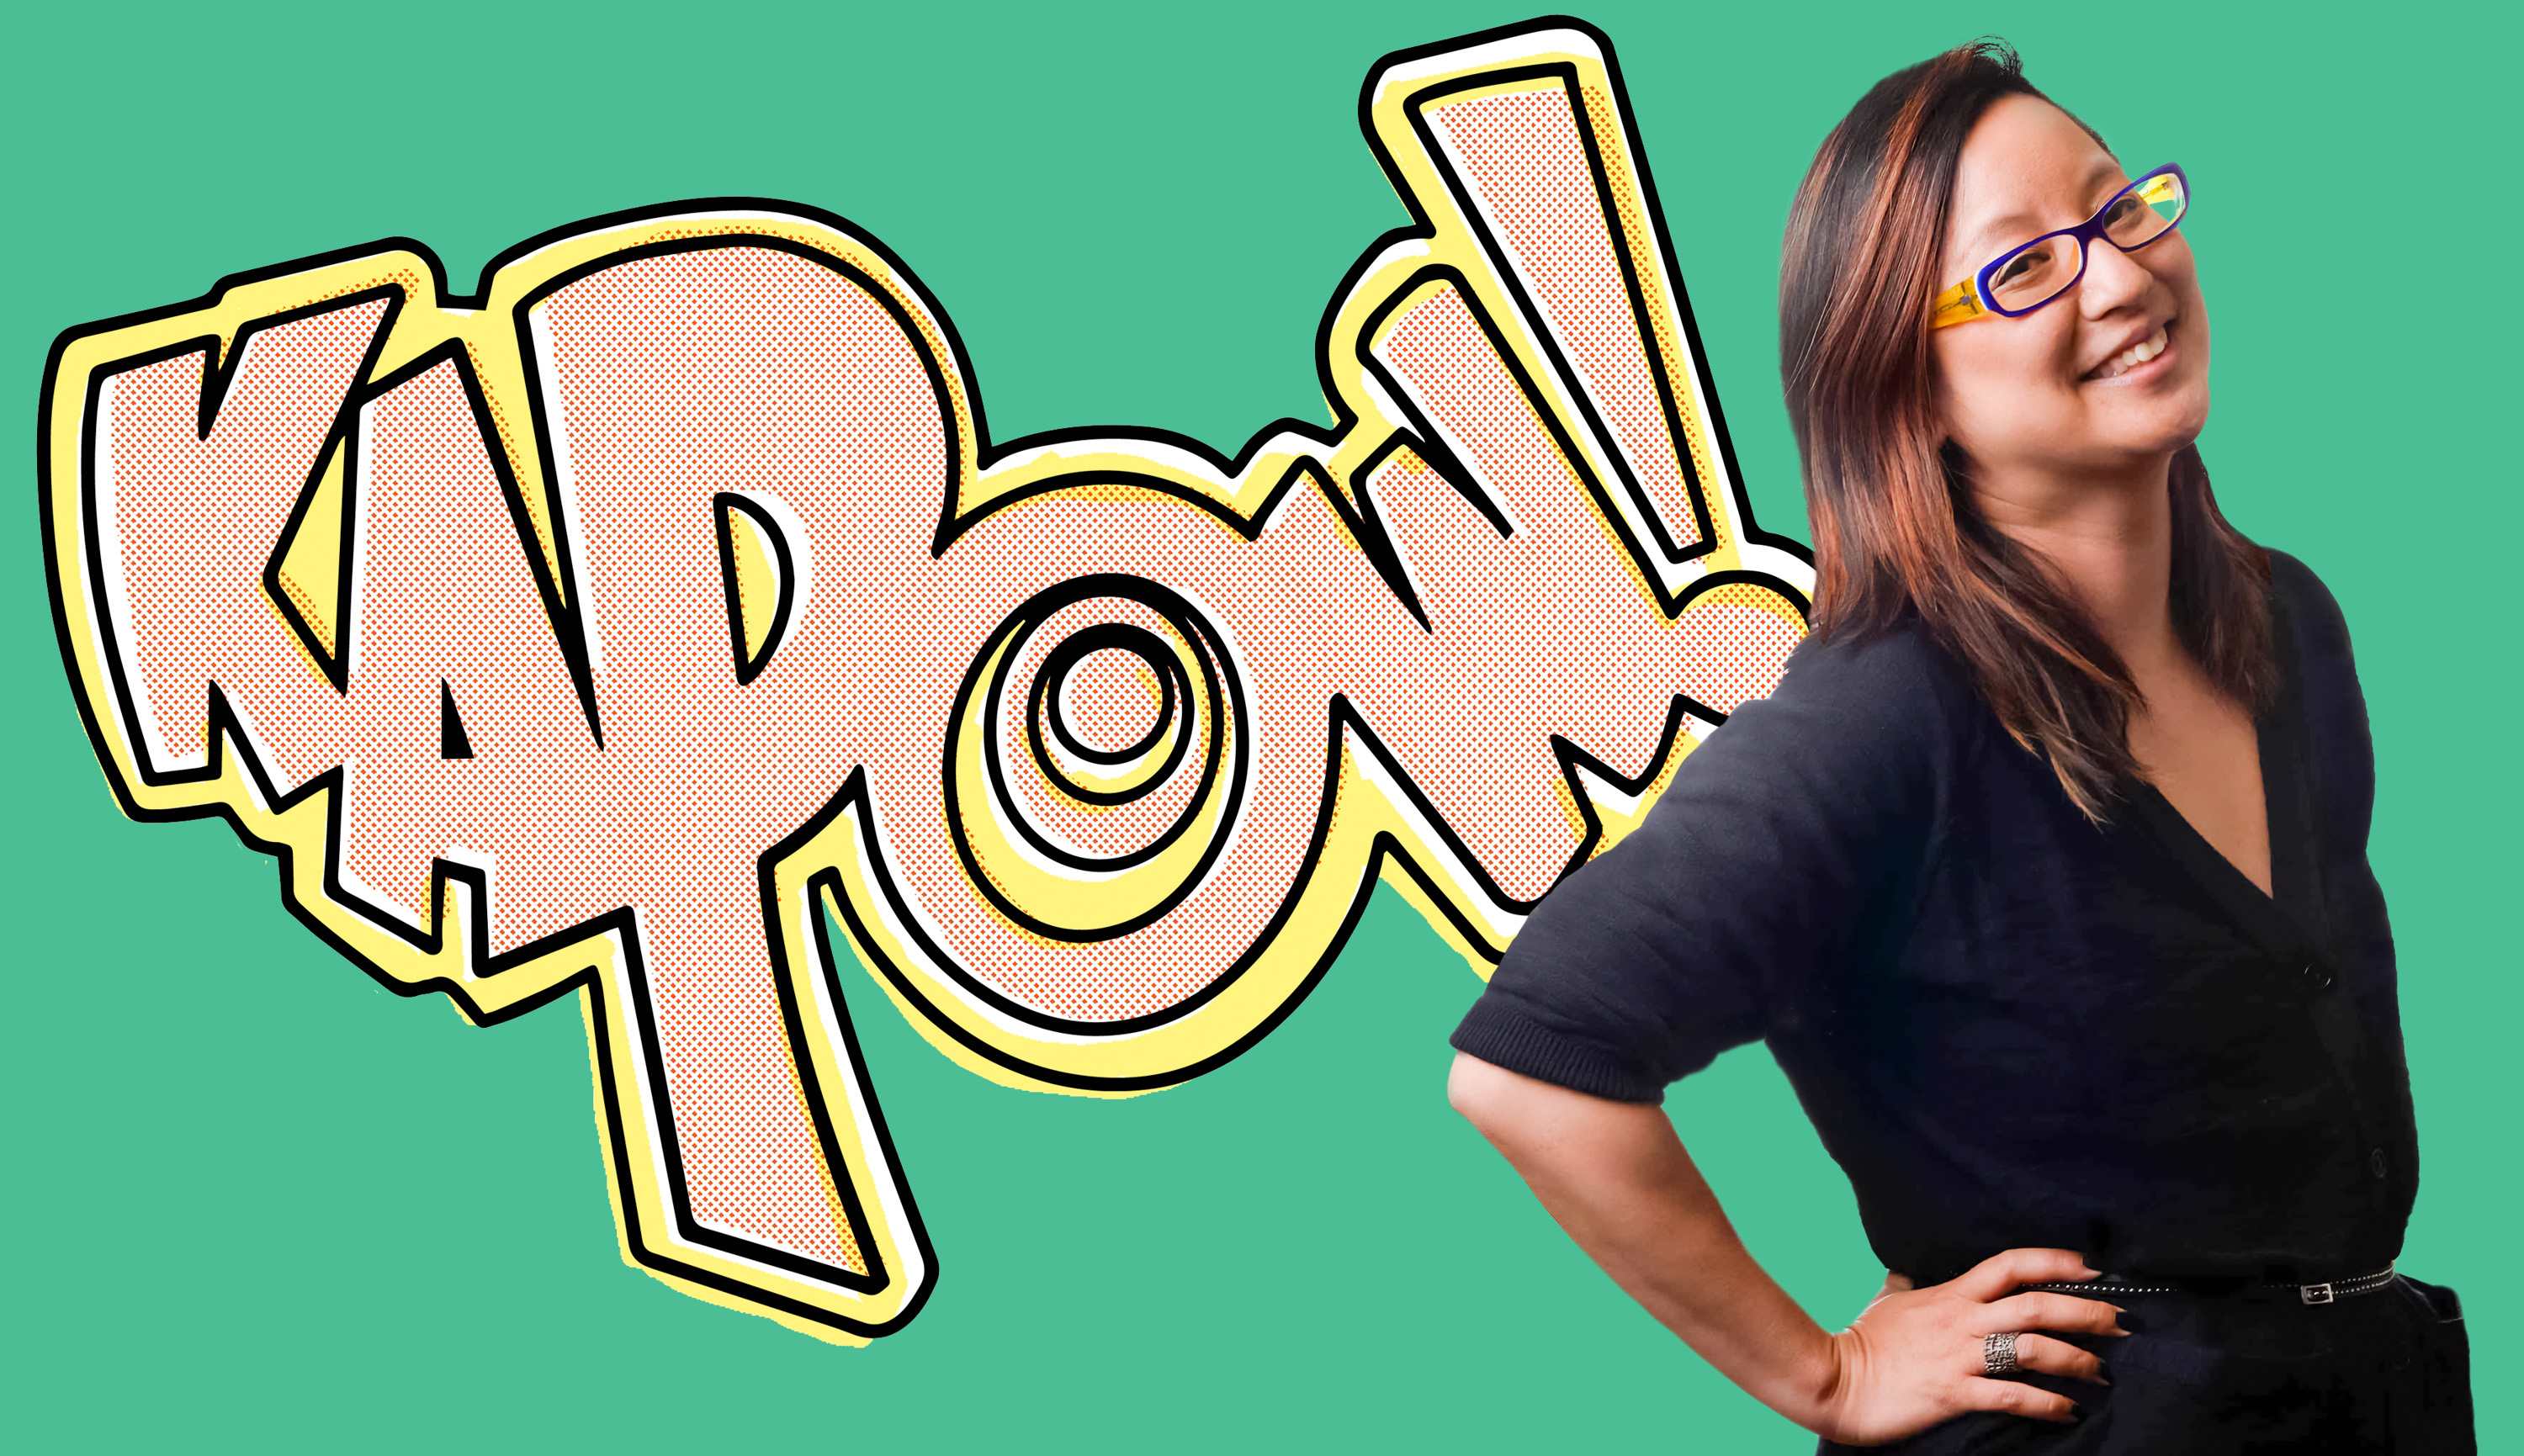 Amy Chu and word Kapow! in a comic style